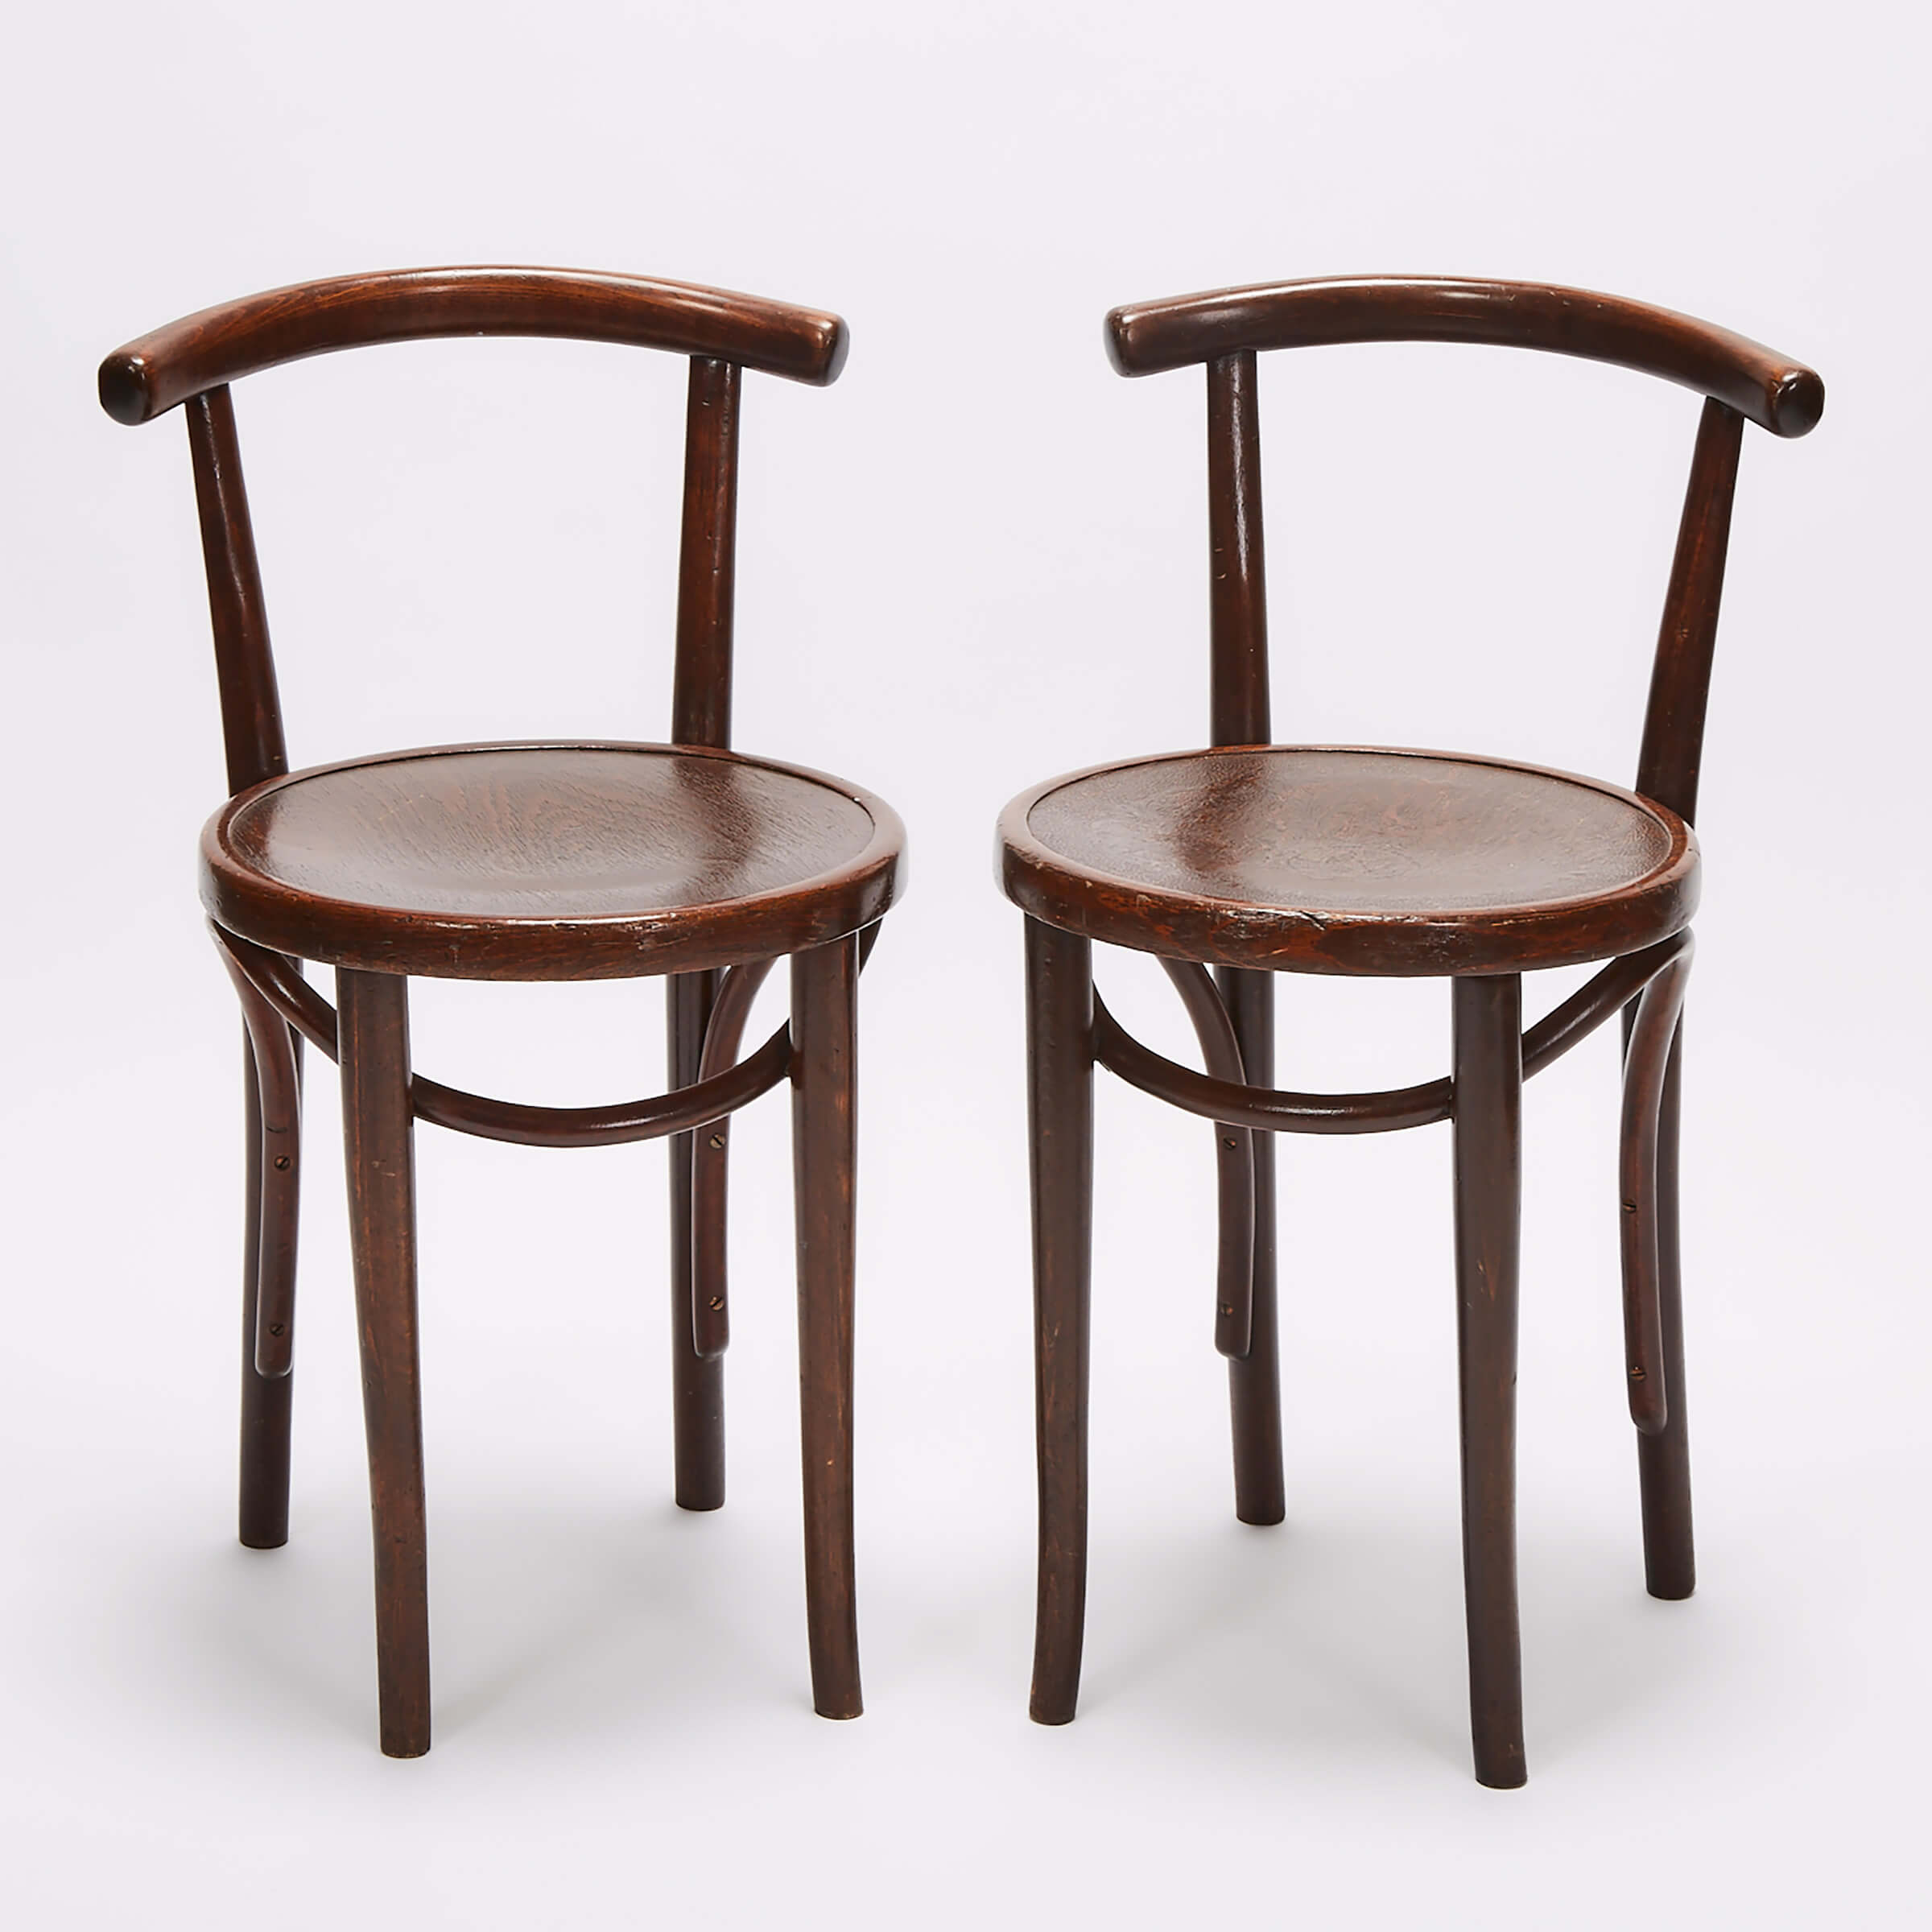 Pair of Thonet, Vienna, Bentwood Lowback Side Chairs, c.1910